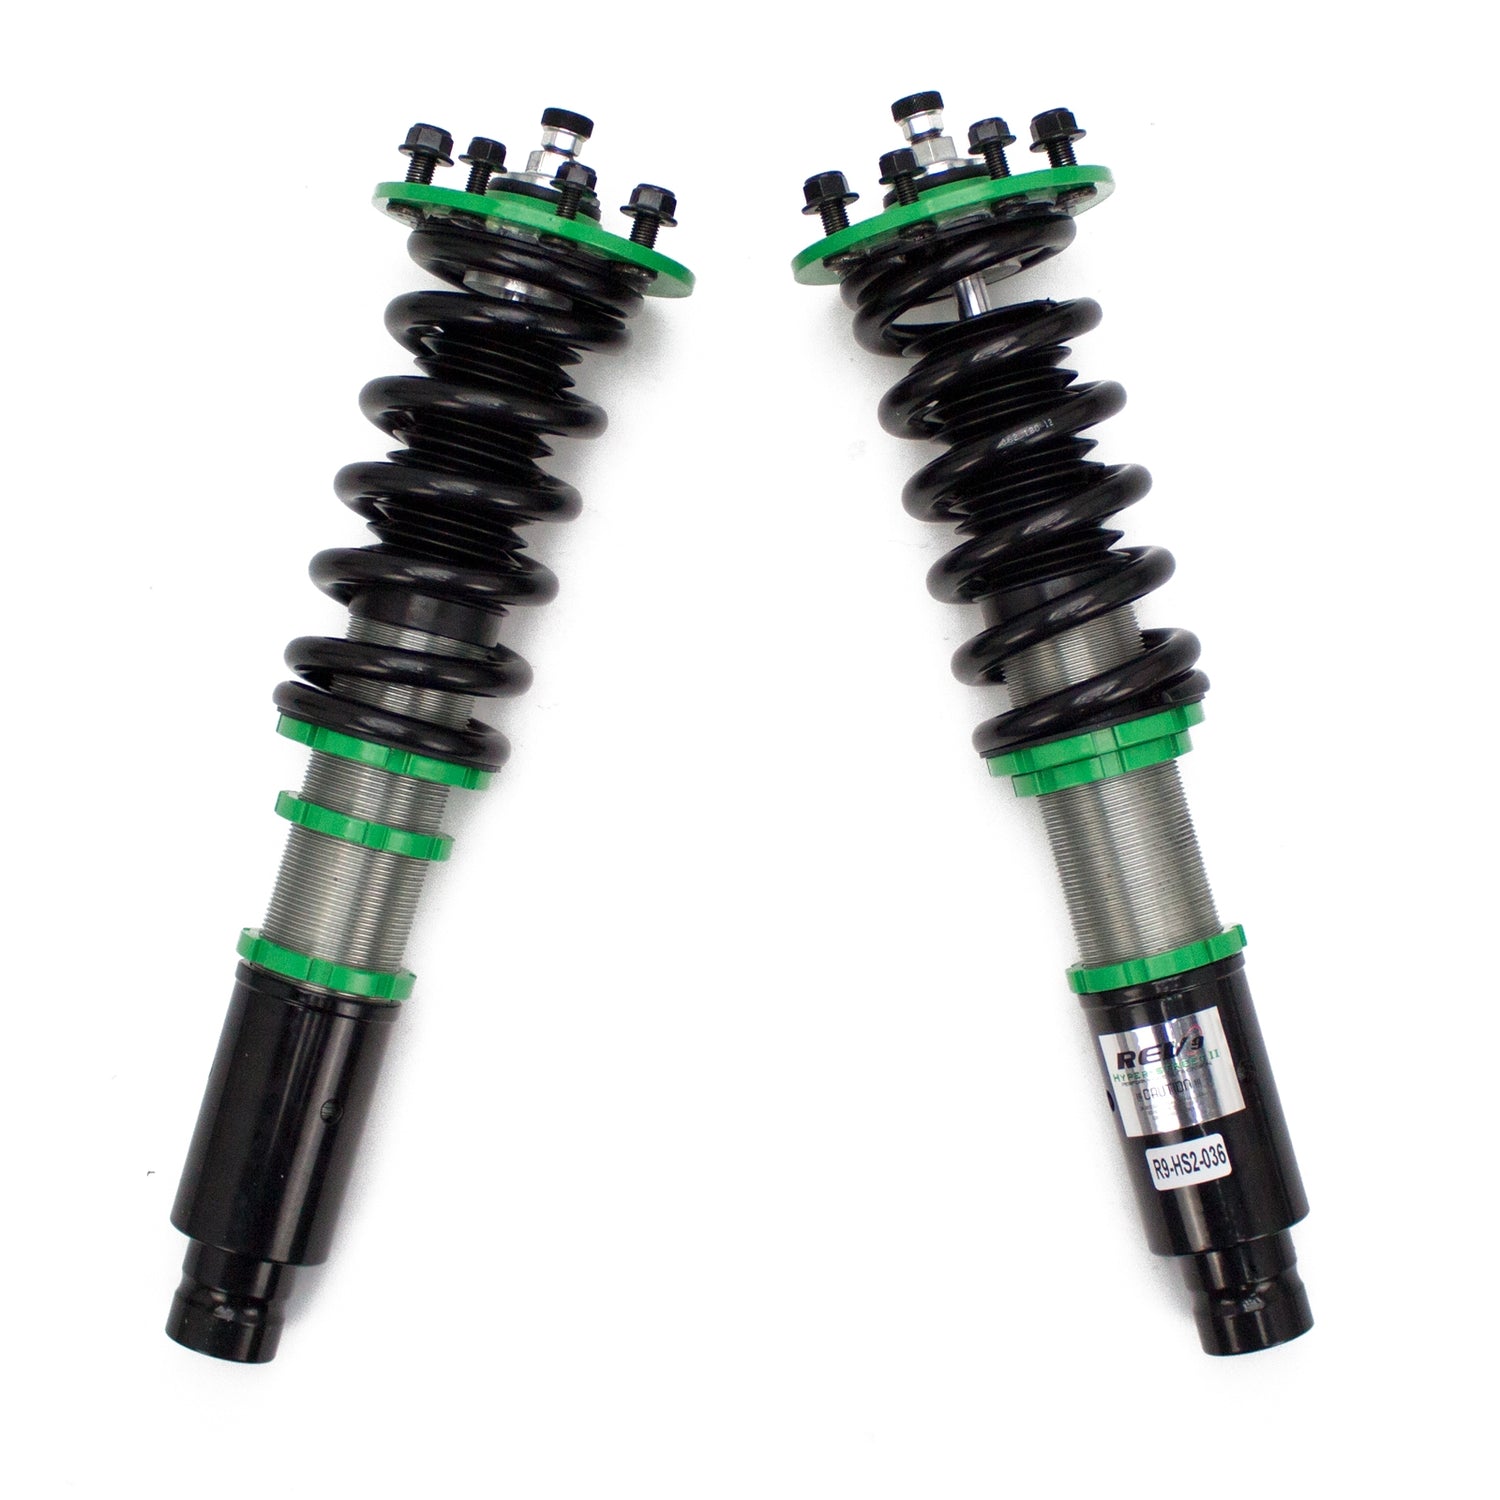 R9-HS2-036_3, Acura CL 01-03, Hyper-Street II Coilover Suspension Lowering Kit, Mono-Tube Shock w/ 32 Click Rebound Setting, Full Length Adjustable